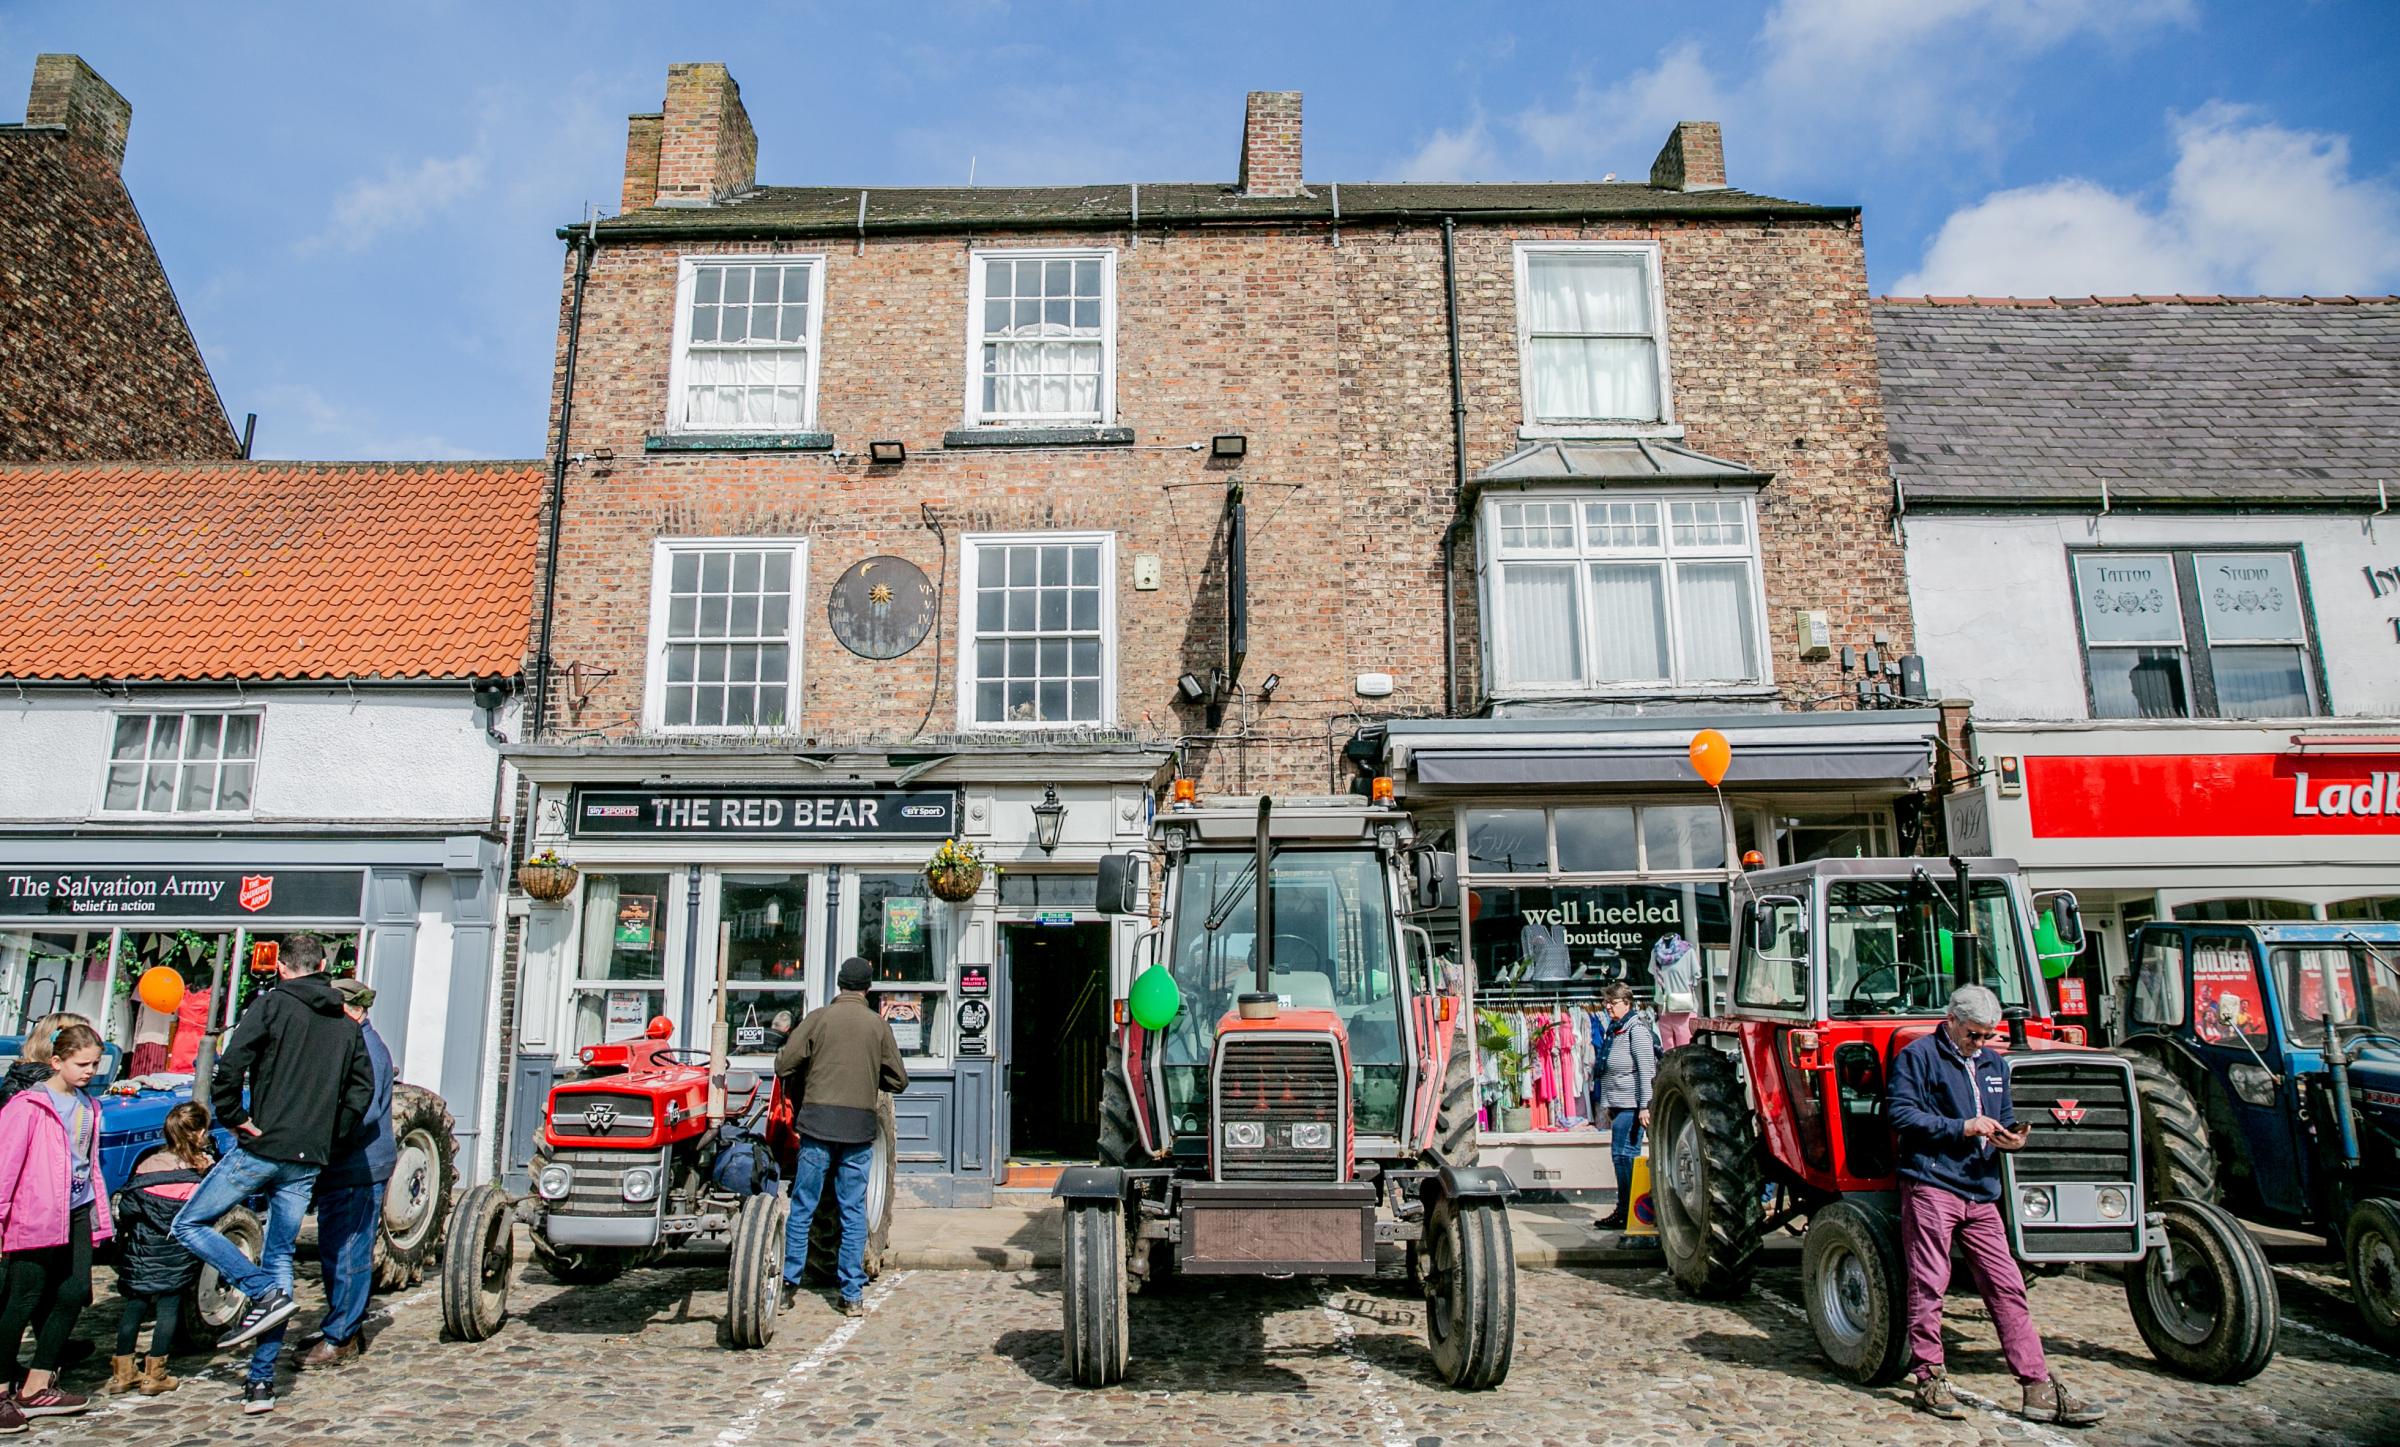 Tv Vet Peter Wright tractor run for Thirsk Hospice charity Picture: SARAH CALDECOTT